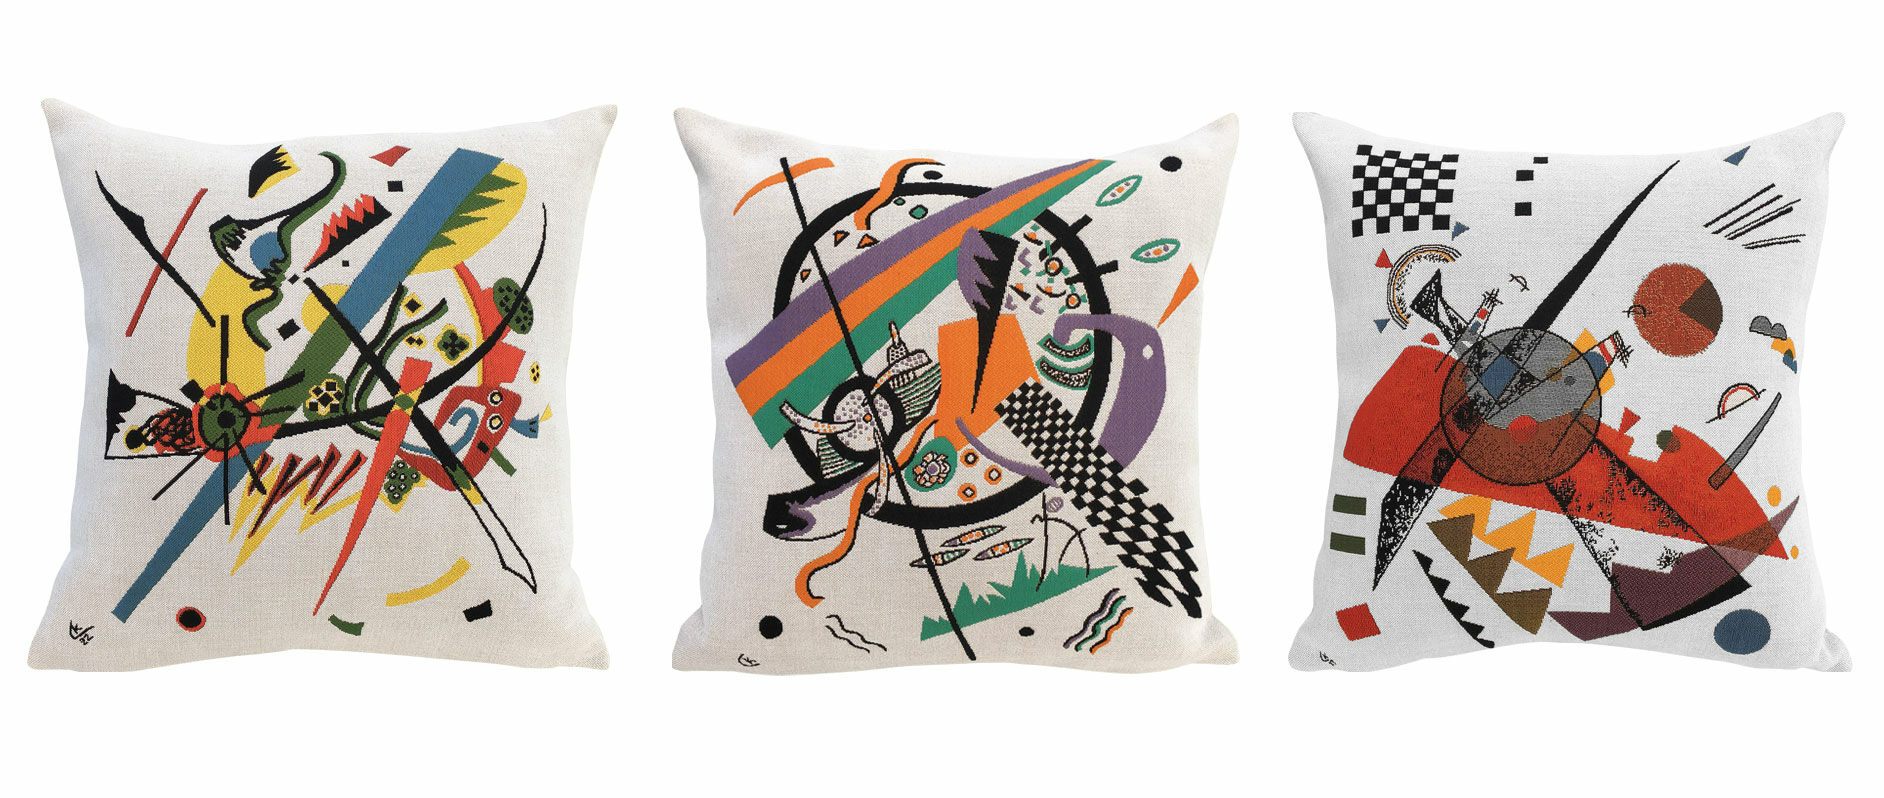 Set of 3 cushion covers with artist's motifs by Wassily Kandinsky